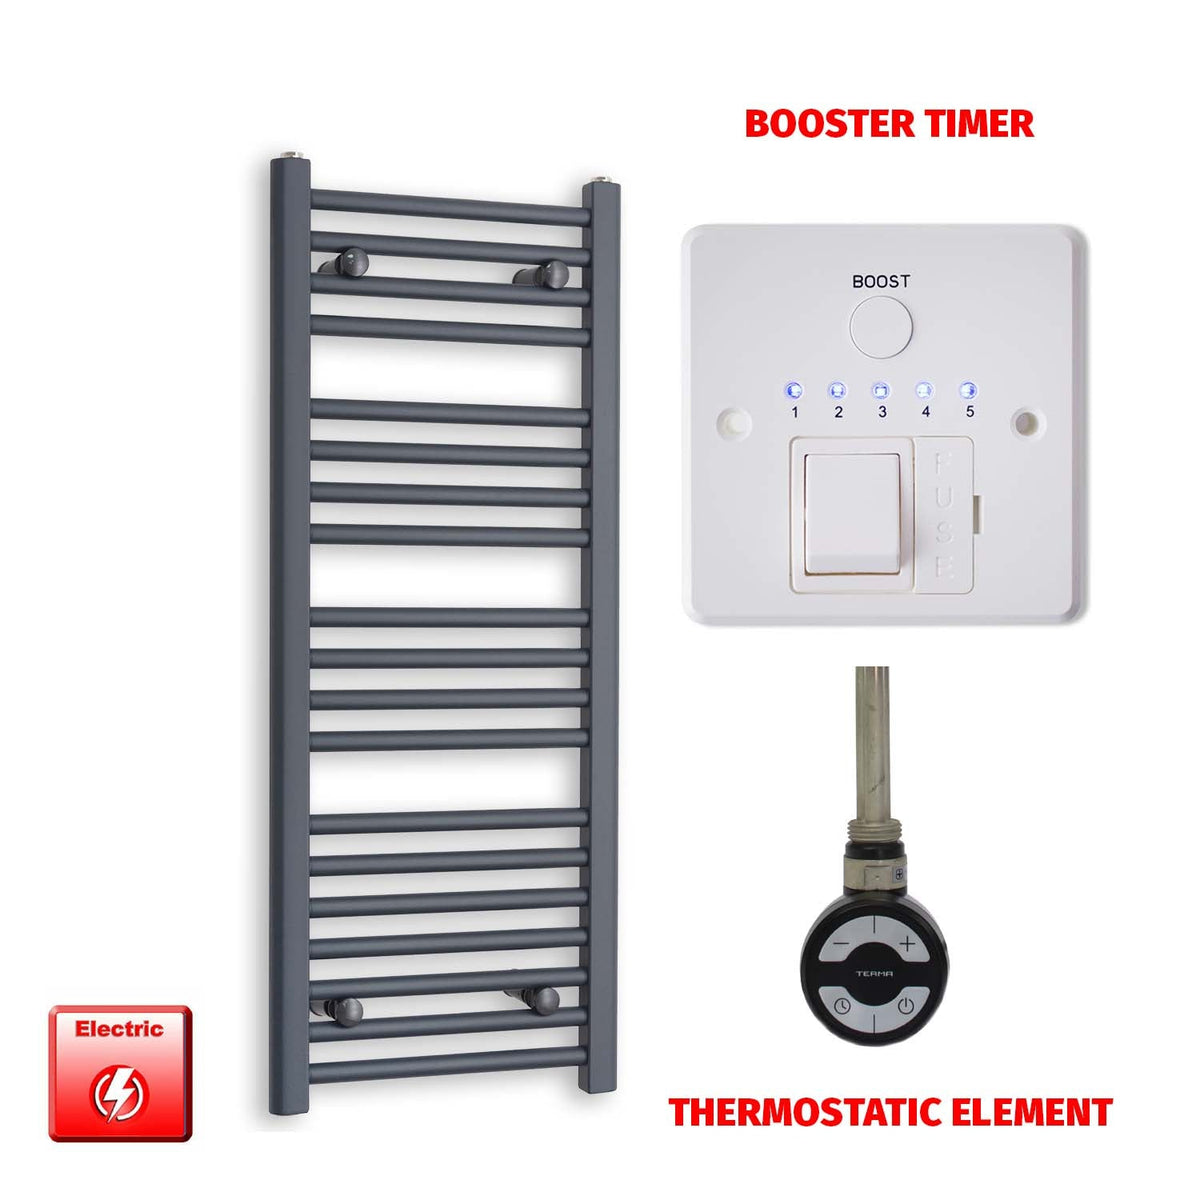 1000 x 400 Flat Anthracite Pre-Filled Electric Heated Towel Radiator HTR MOA Thermostatic element Booster timer